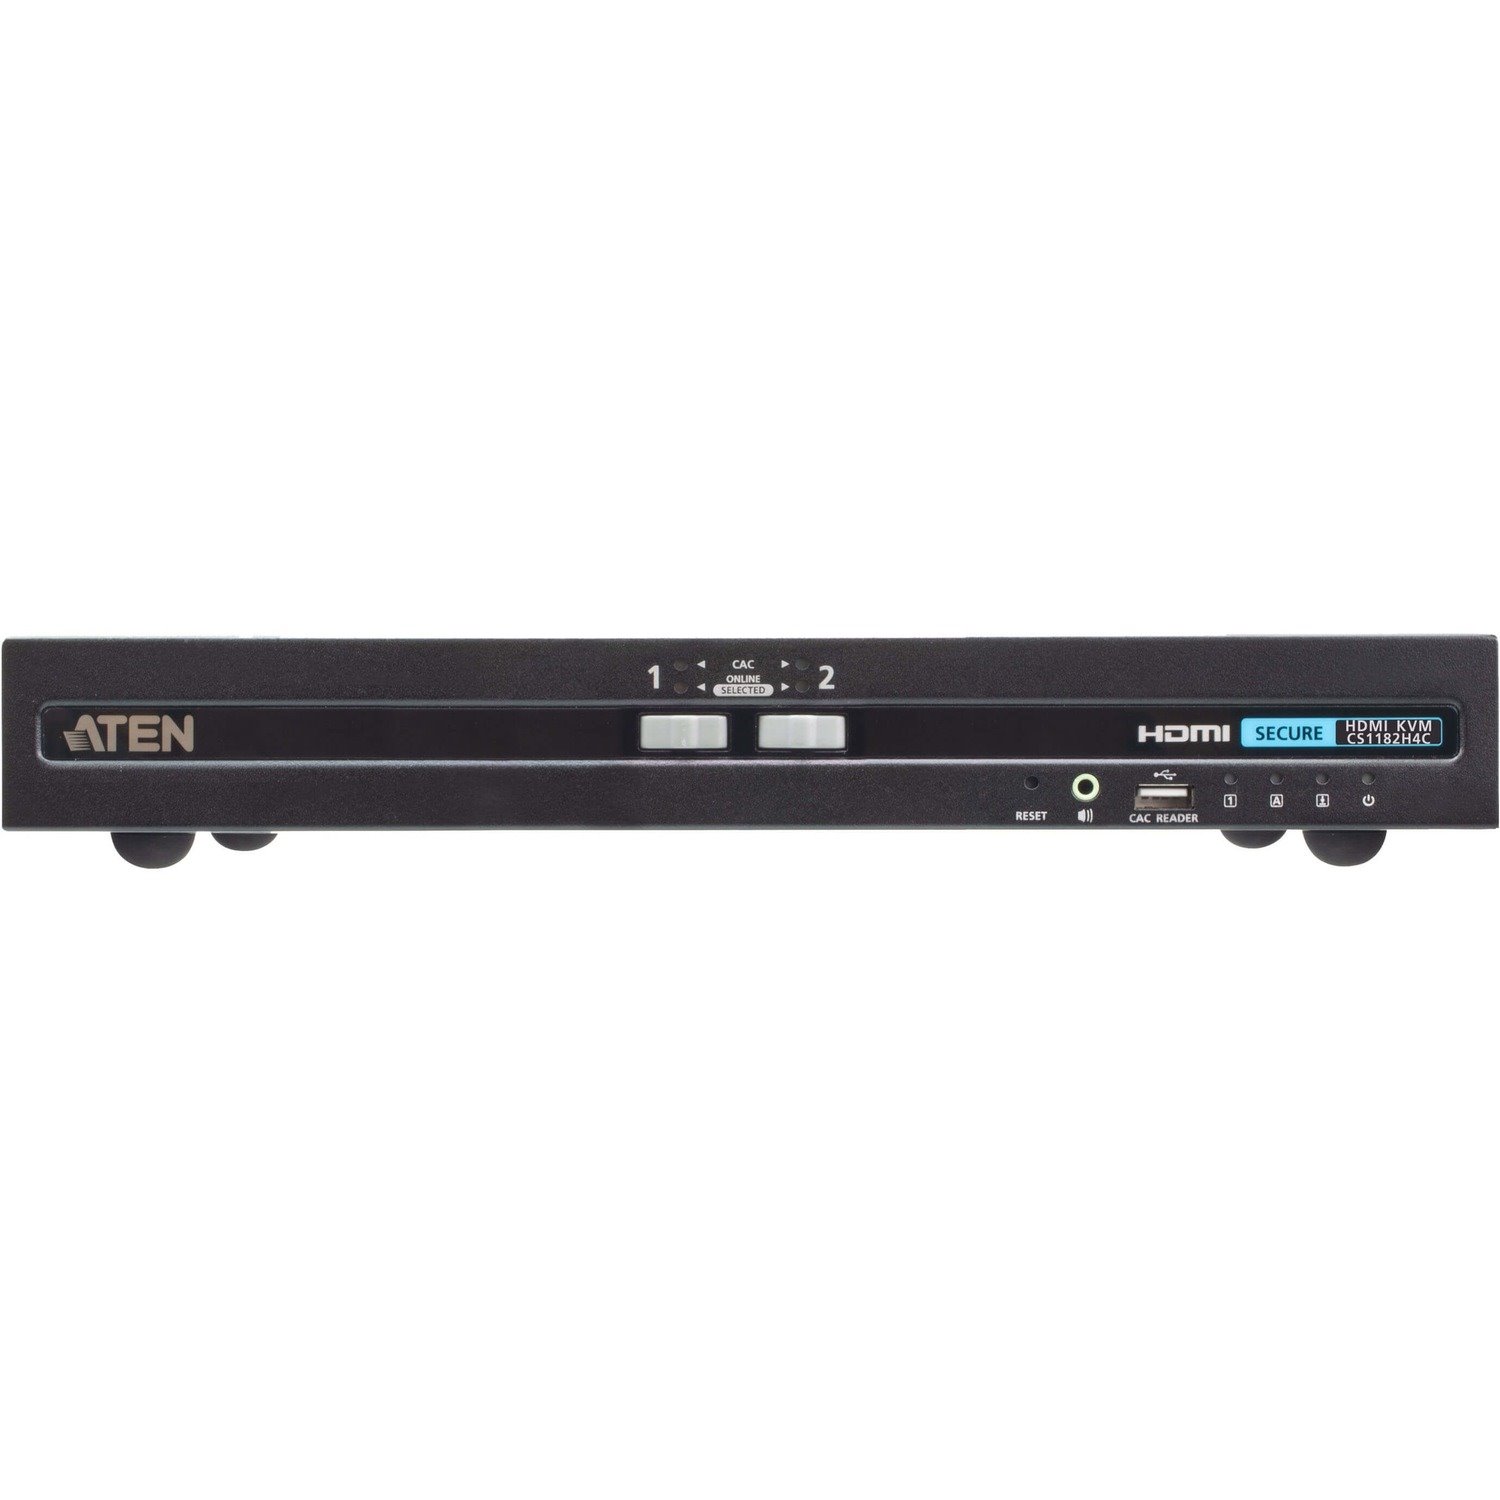 ATEN 2-Port USB HDMI Secure KVM Switch with CAC (PSD PP v4.0 Compliant)